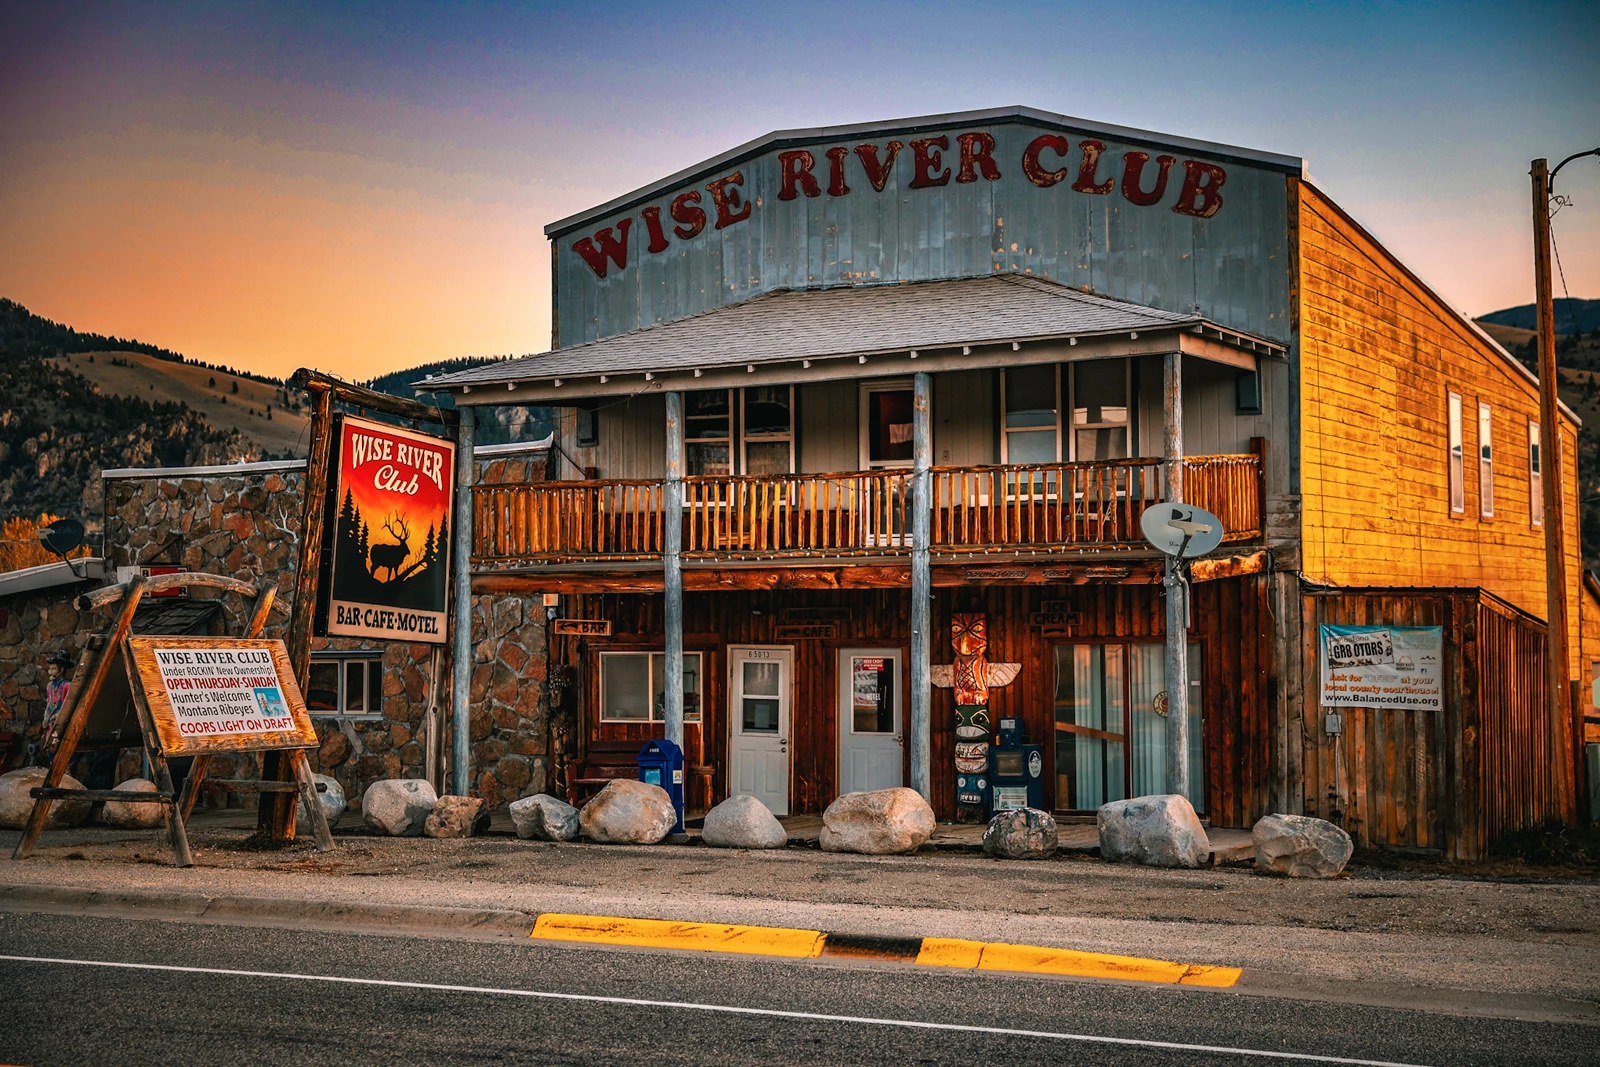 The Wise River Club in Wise River, Montana